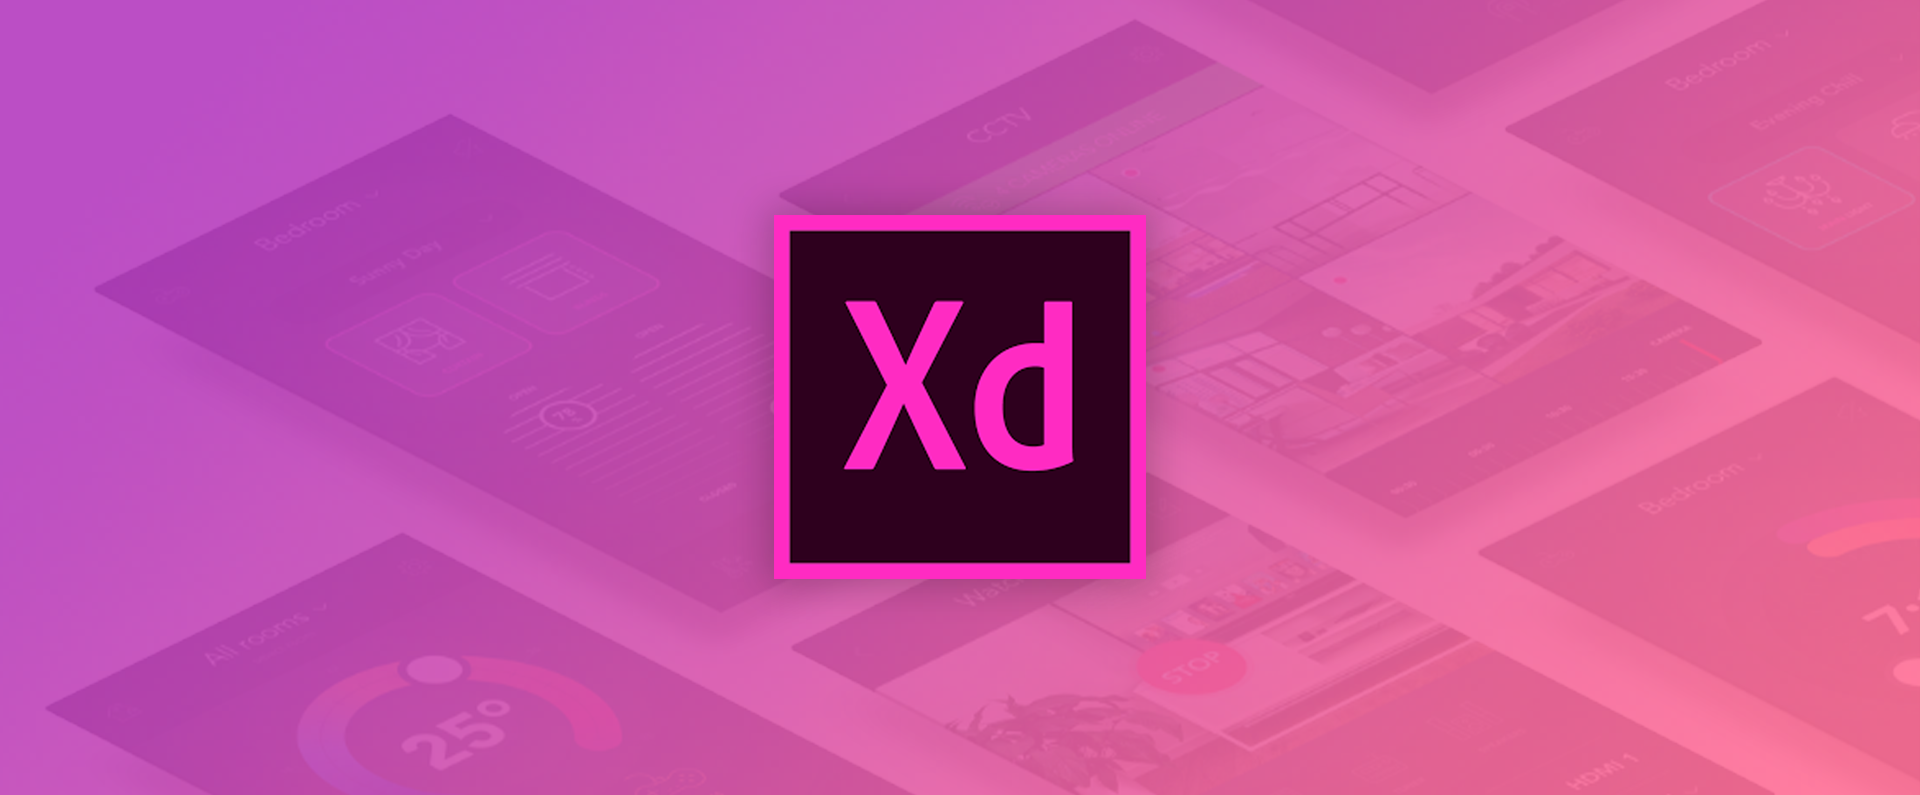 Adobe XD — 30 Tips & Tricks you wish you'd known earlier!.